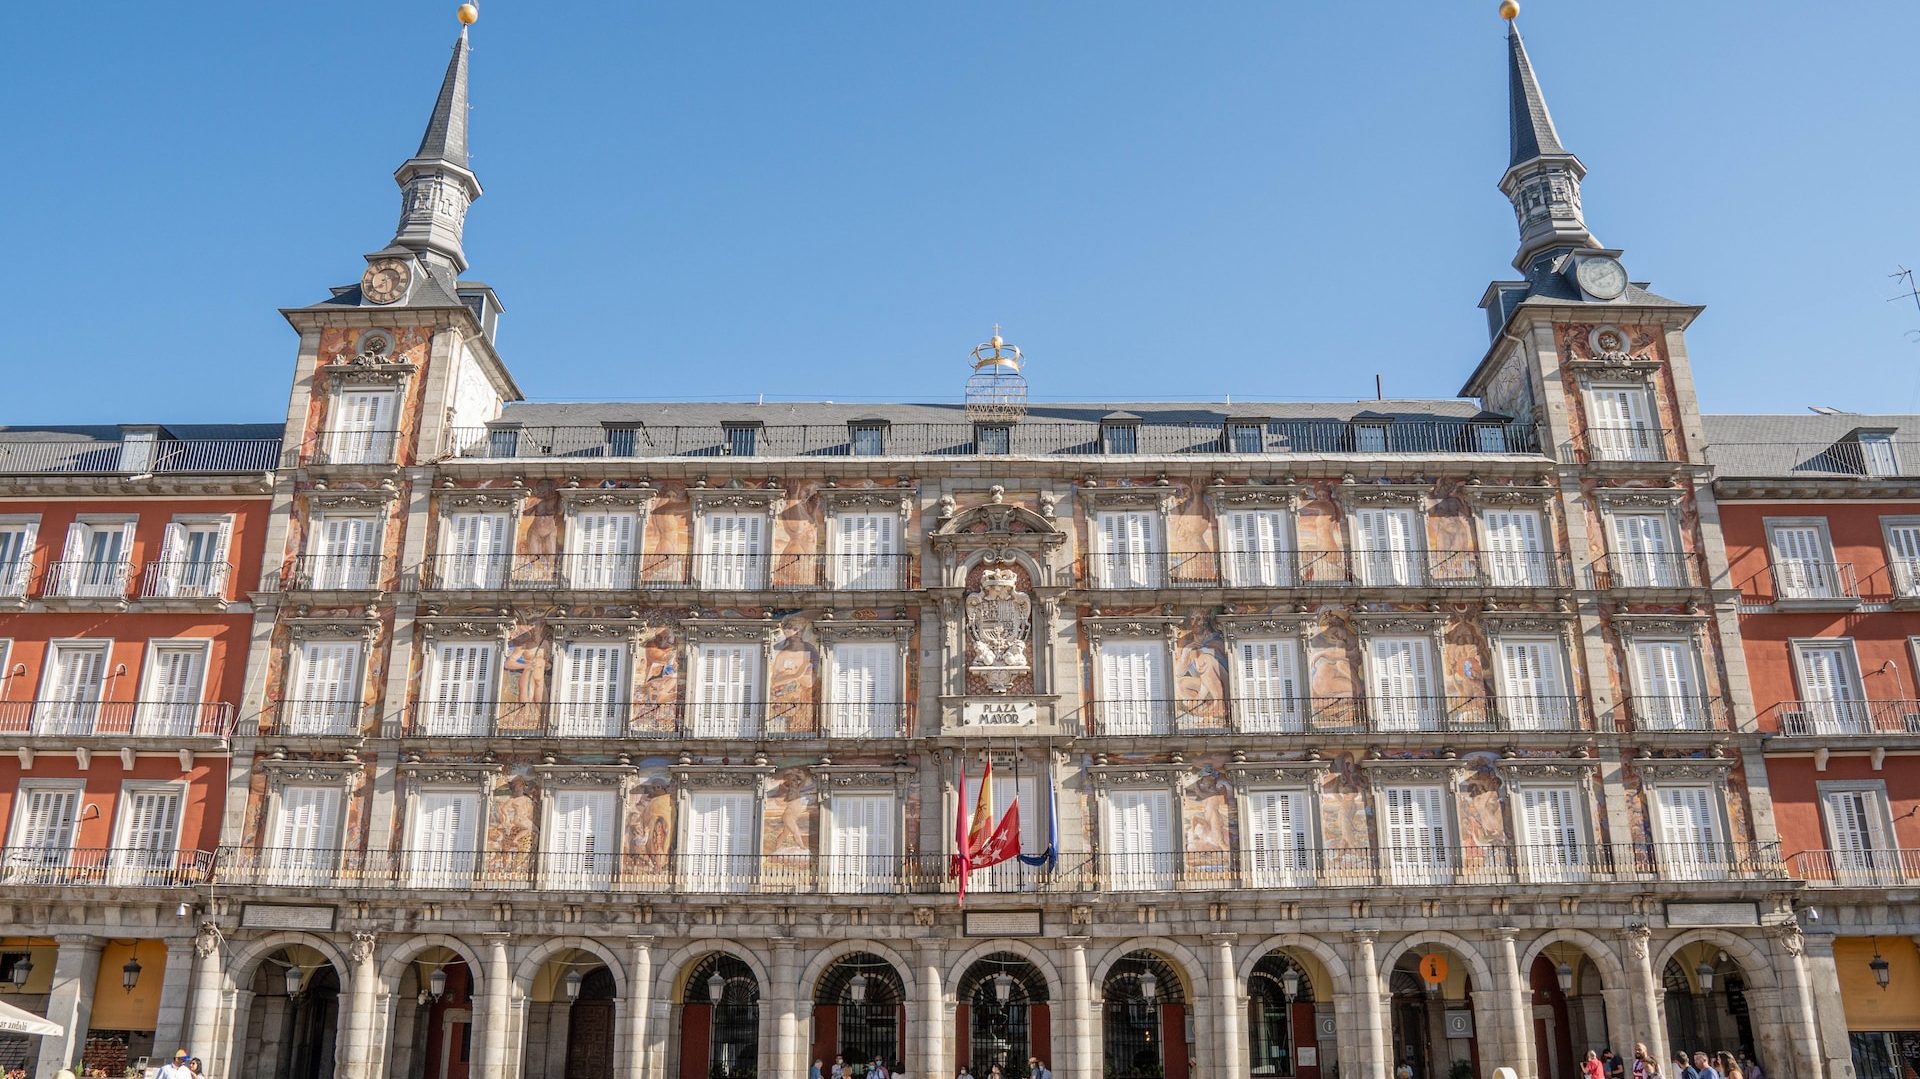 Attractions in Madrid - Plaza Mayor